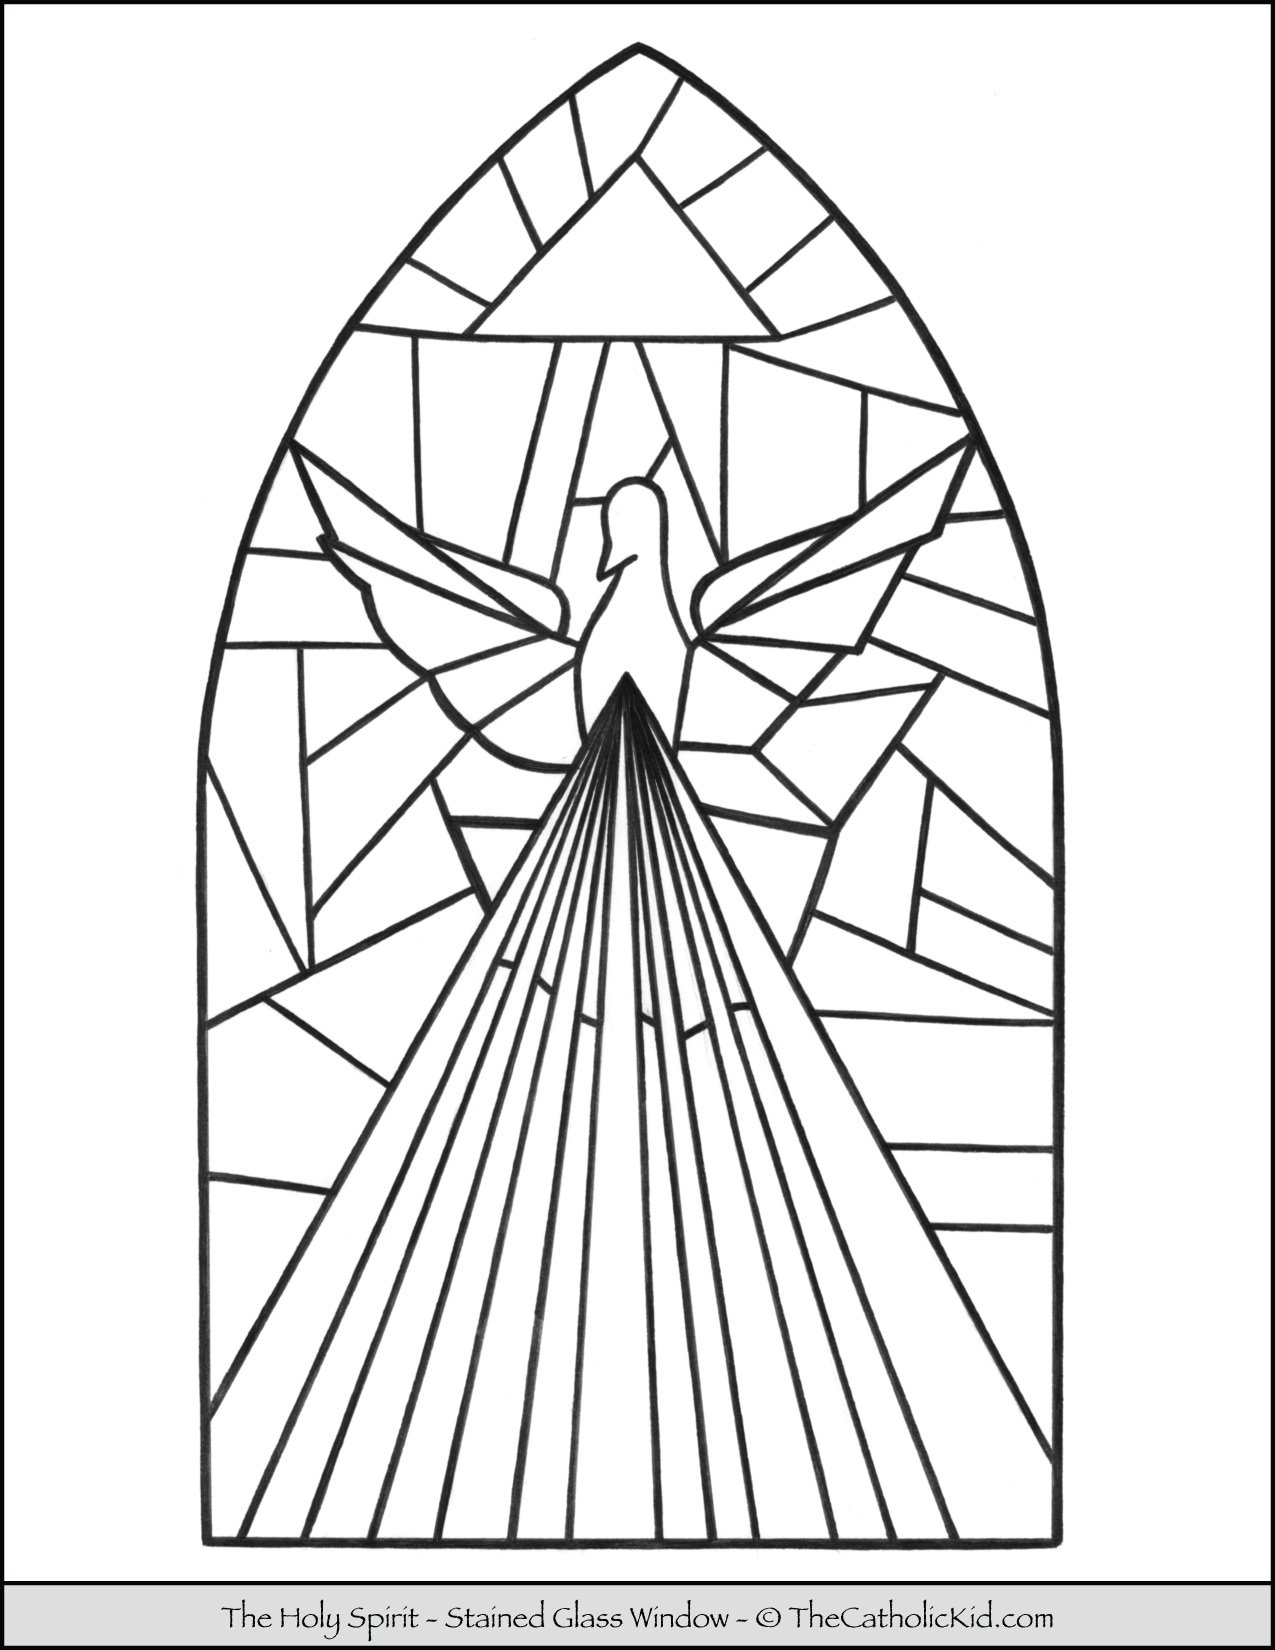 Holy spirit stained glass window coloring page